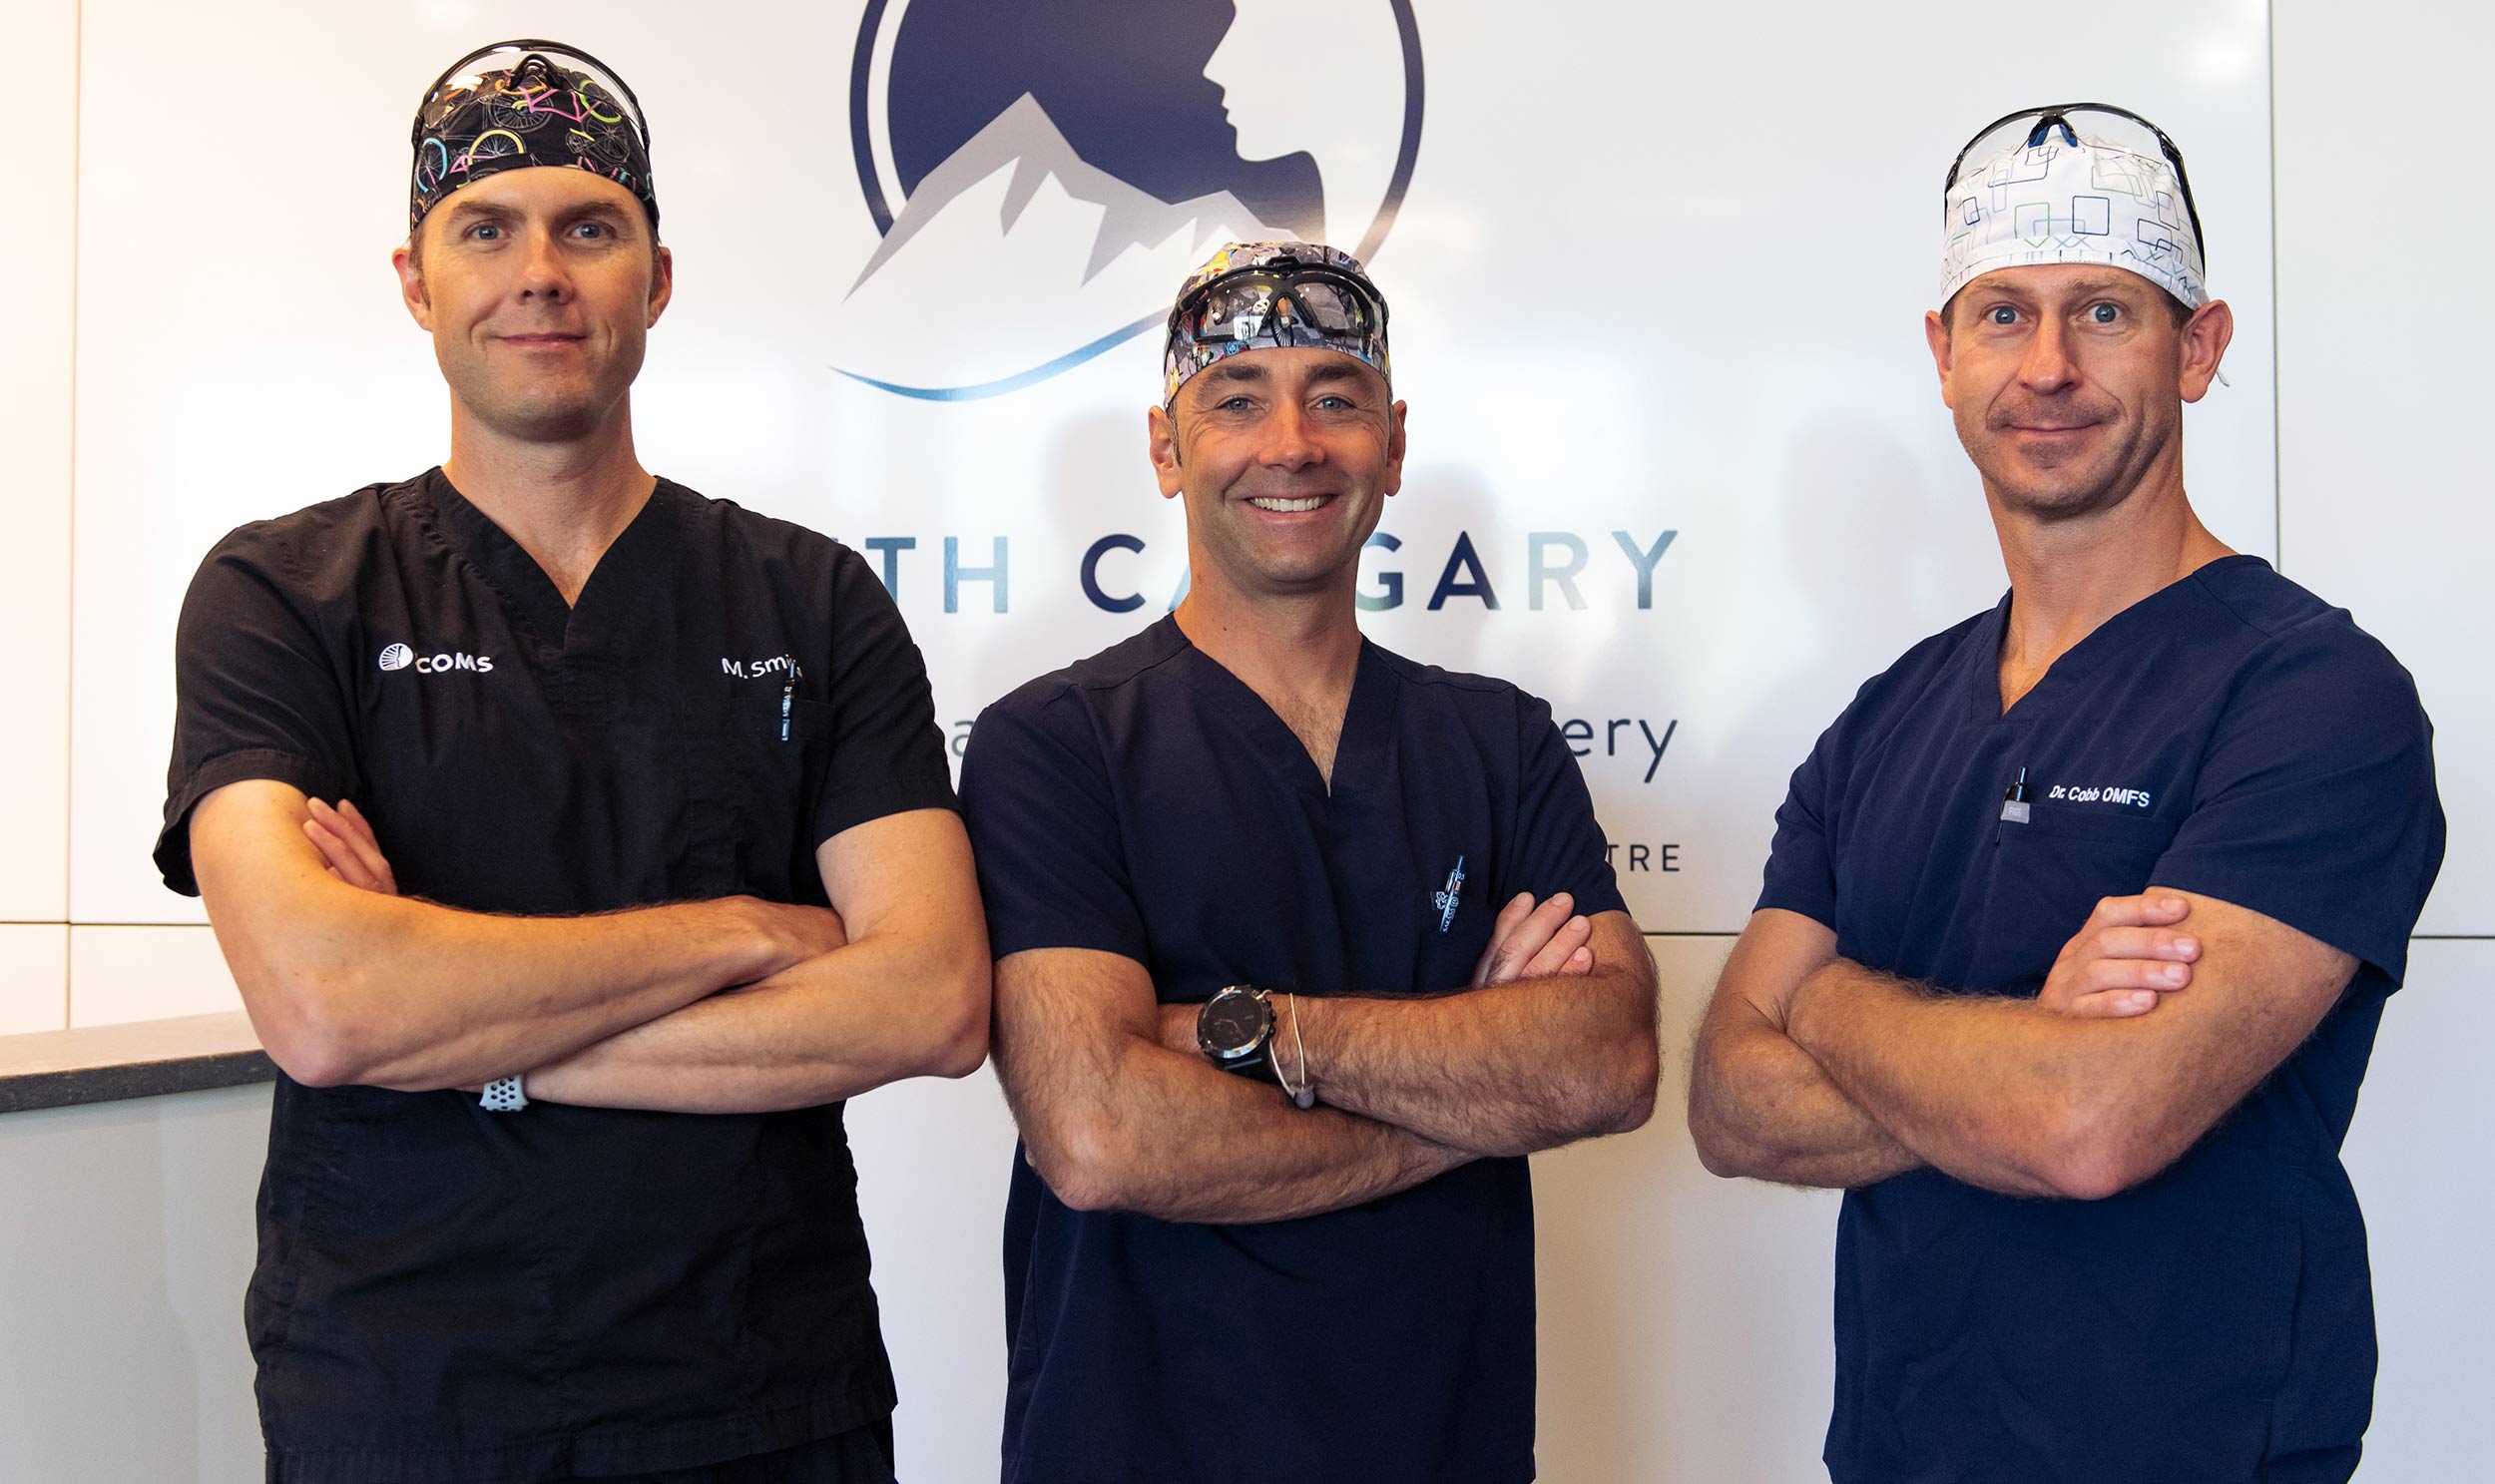 Three oral surgeons from South Calgary Oral Surgery: Dr. Cobb, Dr. Smith and Dr. Habijanac